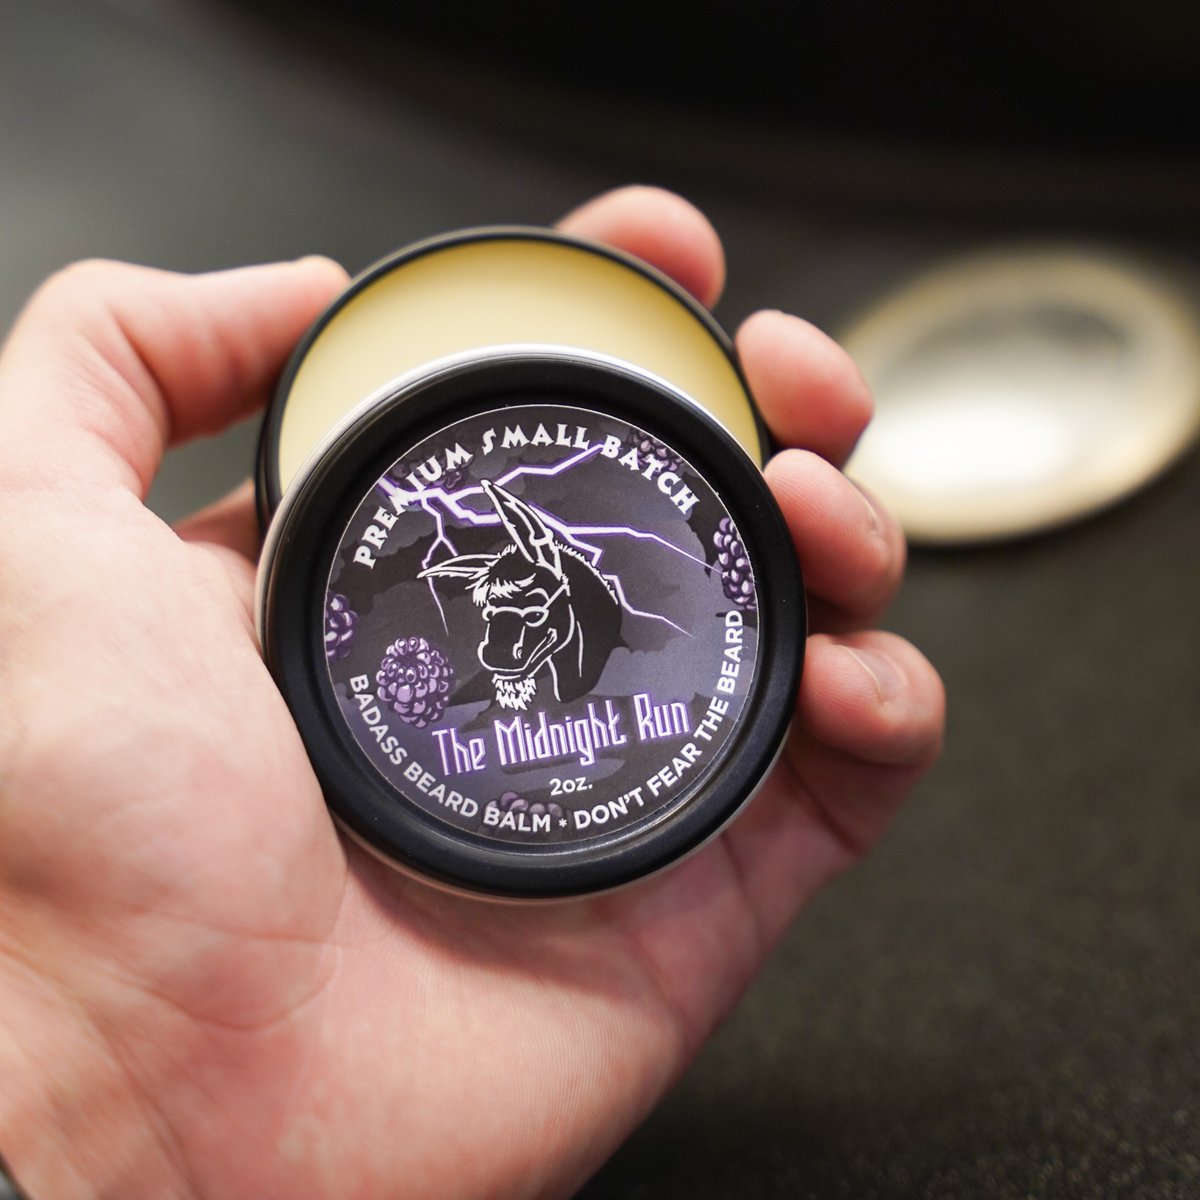 Last call for 'The Midnight Run'. Once it's gone, there's no second chance to experience our 3rd small batch, limited-edition scent. #badassbeardcare #premium #smallbatch #beardcare 👉 badassbeardcare.com/products/small…